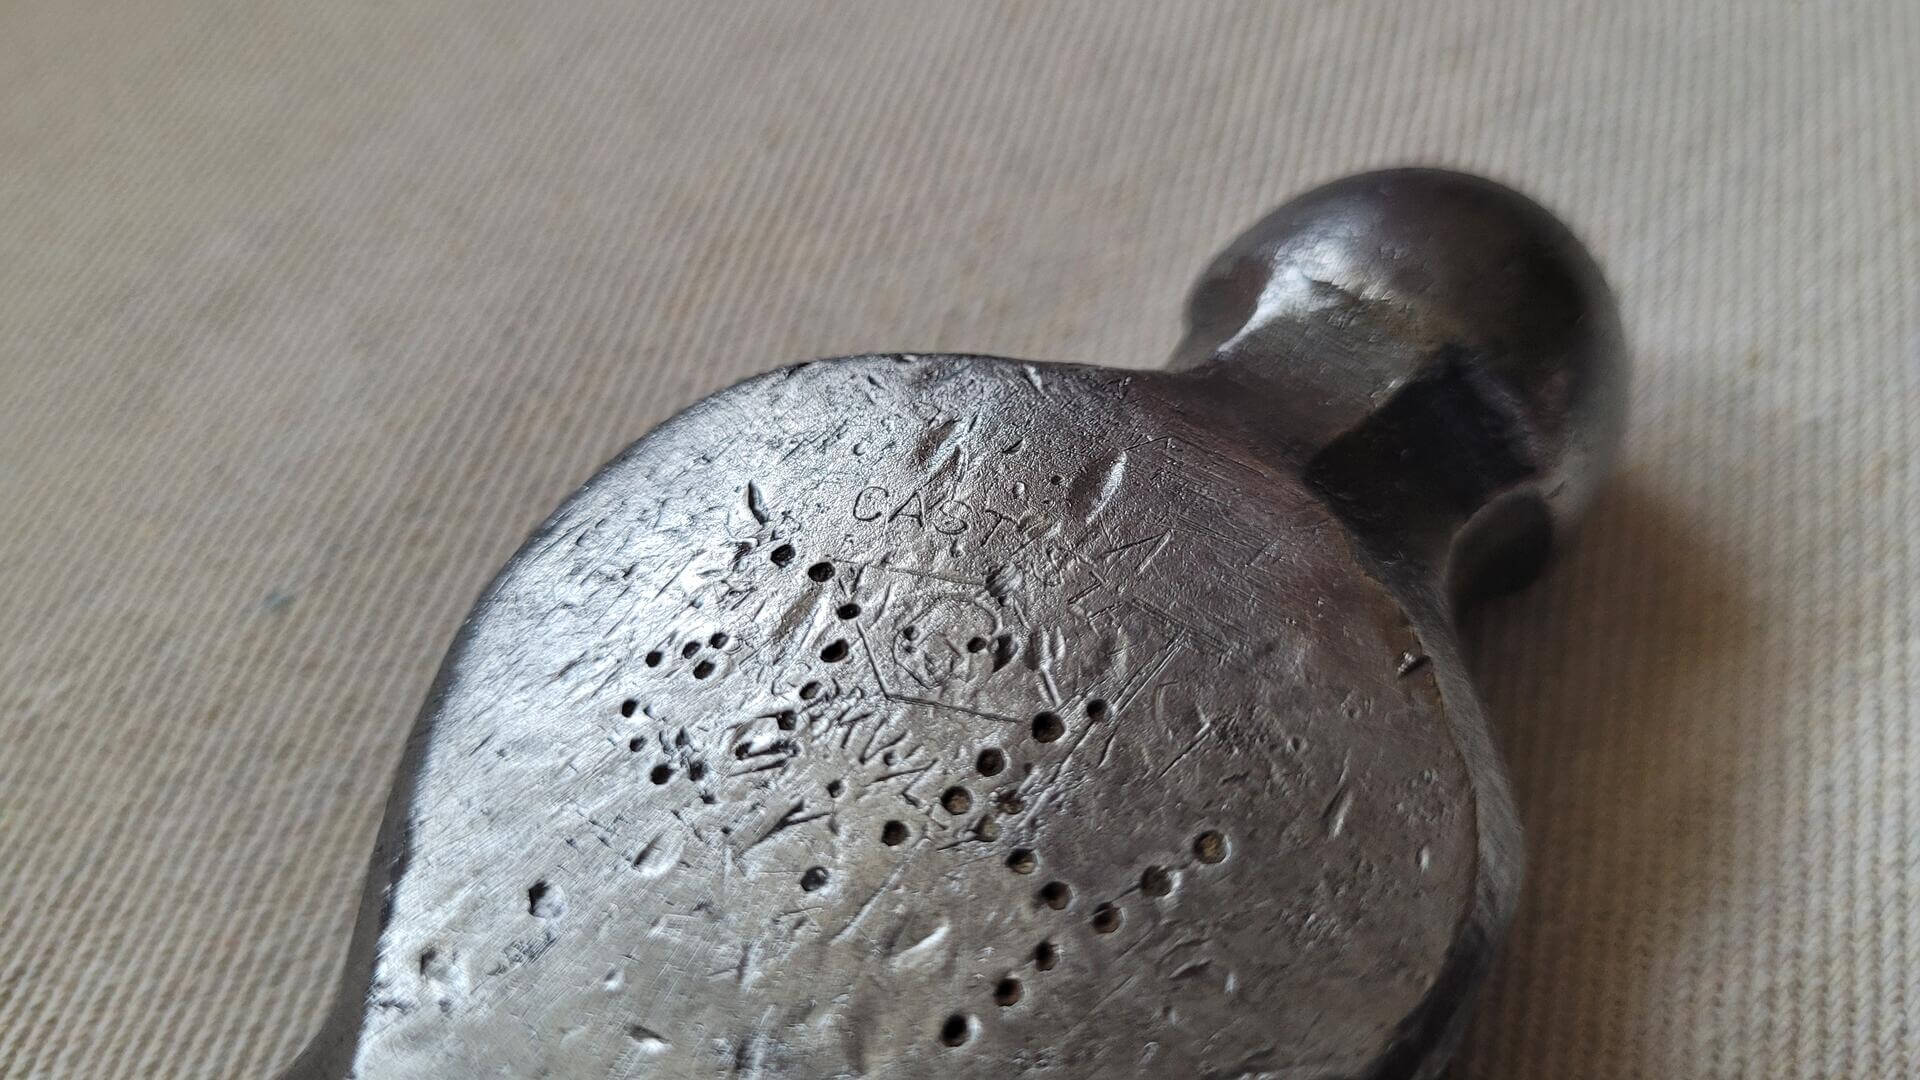 Rare vintage James Smart Mfg Co Ltd cast steel 25OZ ball pein hammer made in Brockville ON. Made in Canada antique collectible hand tools